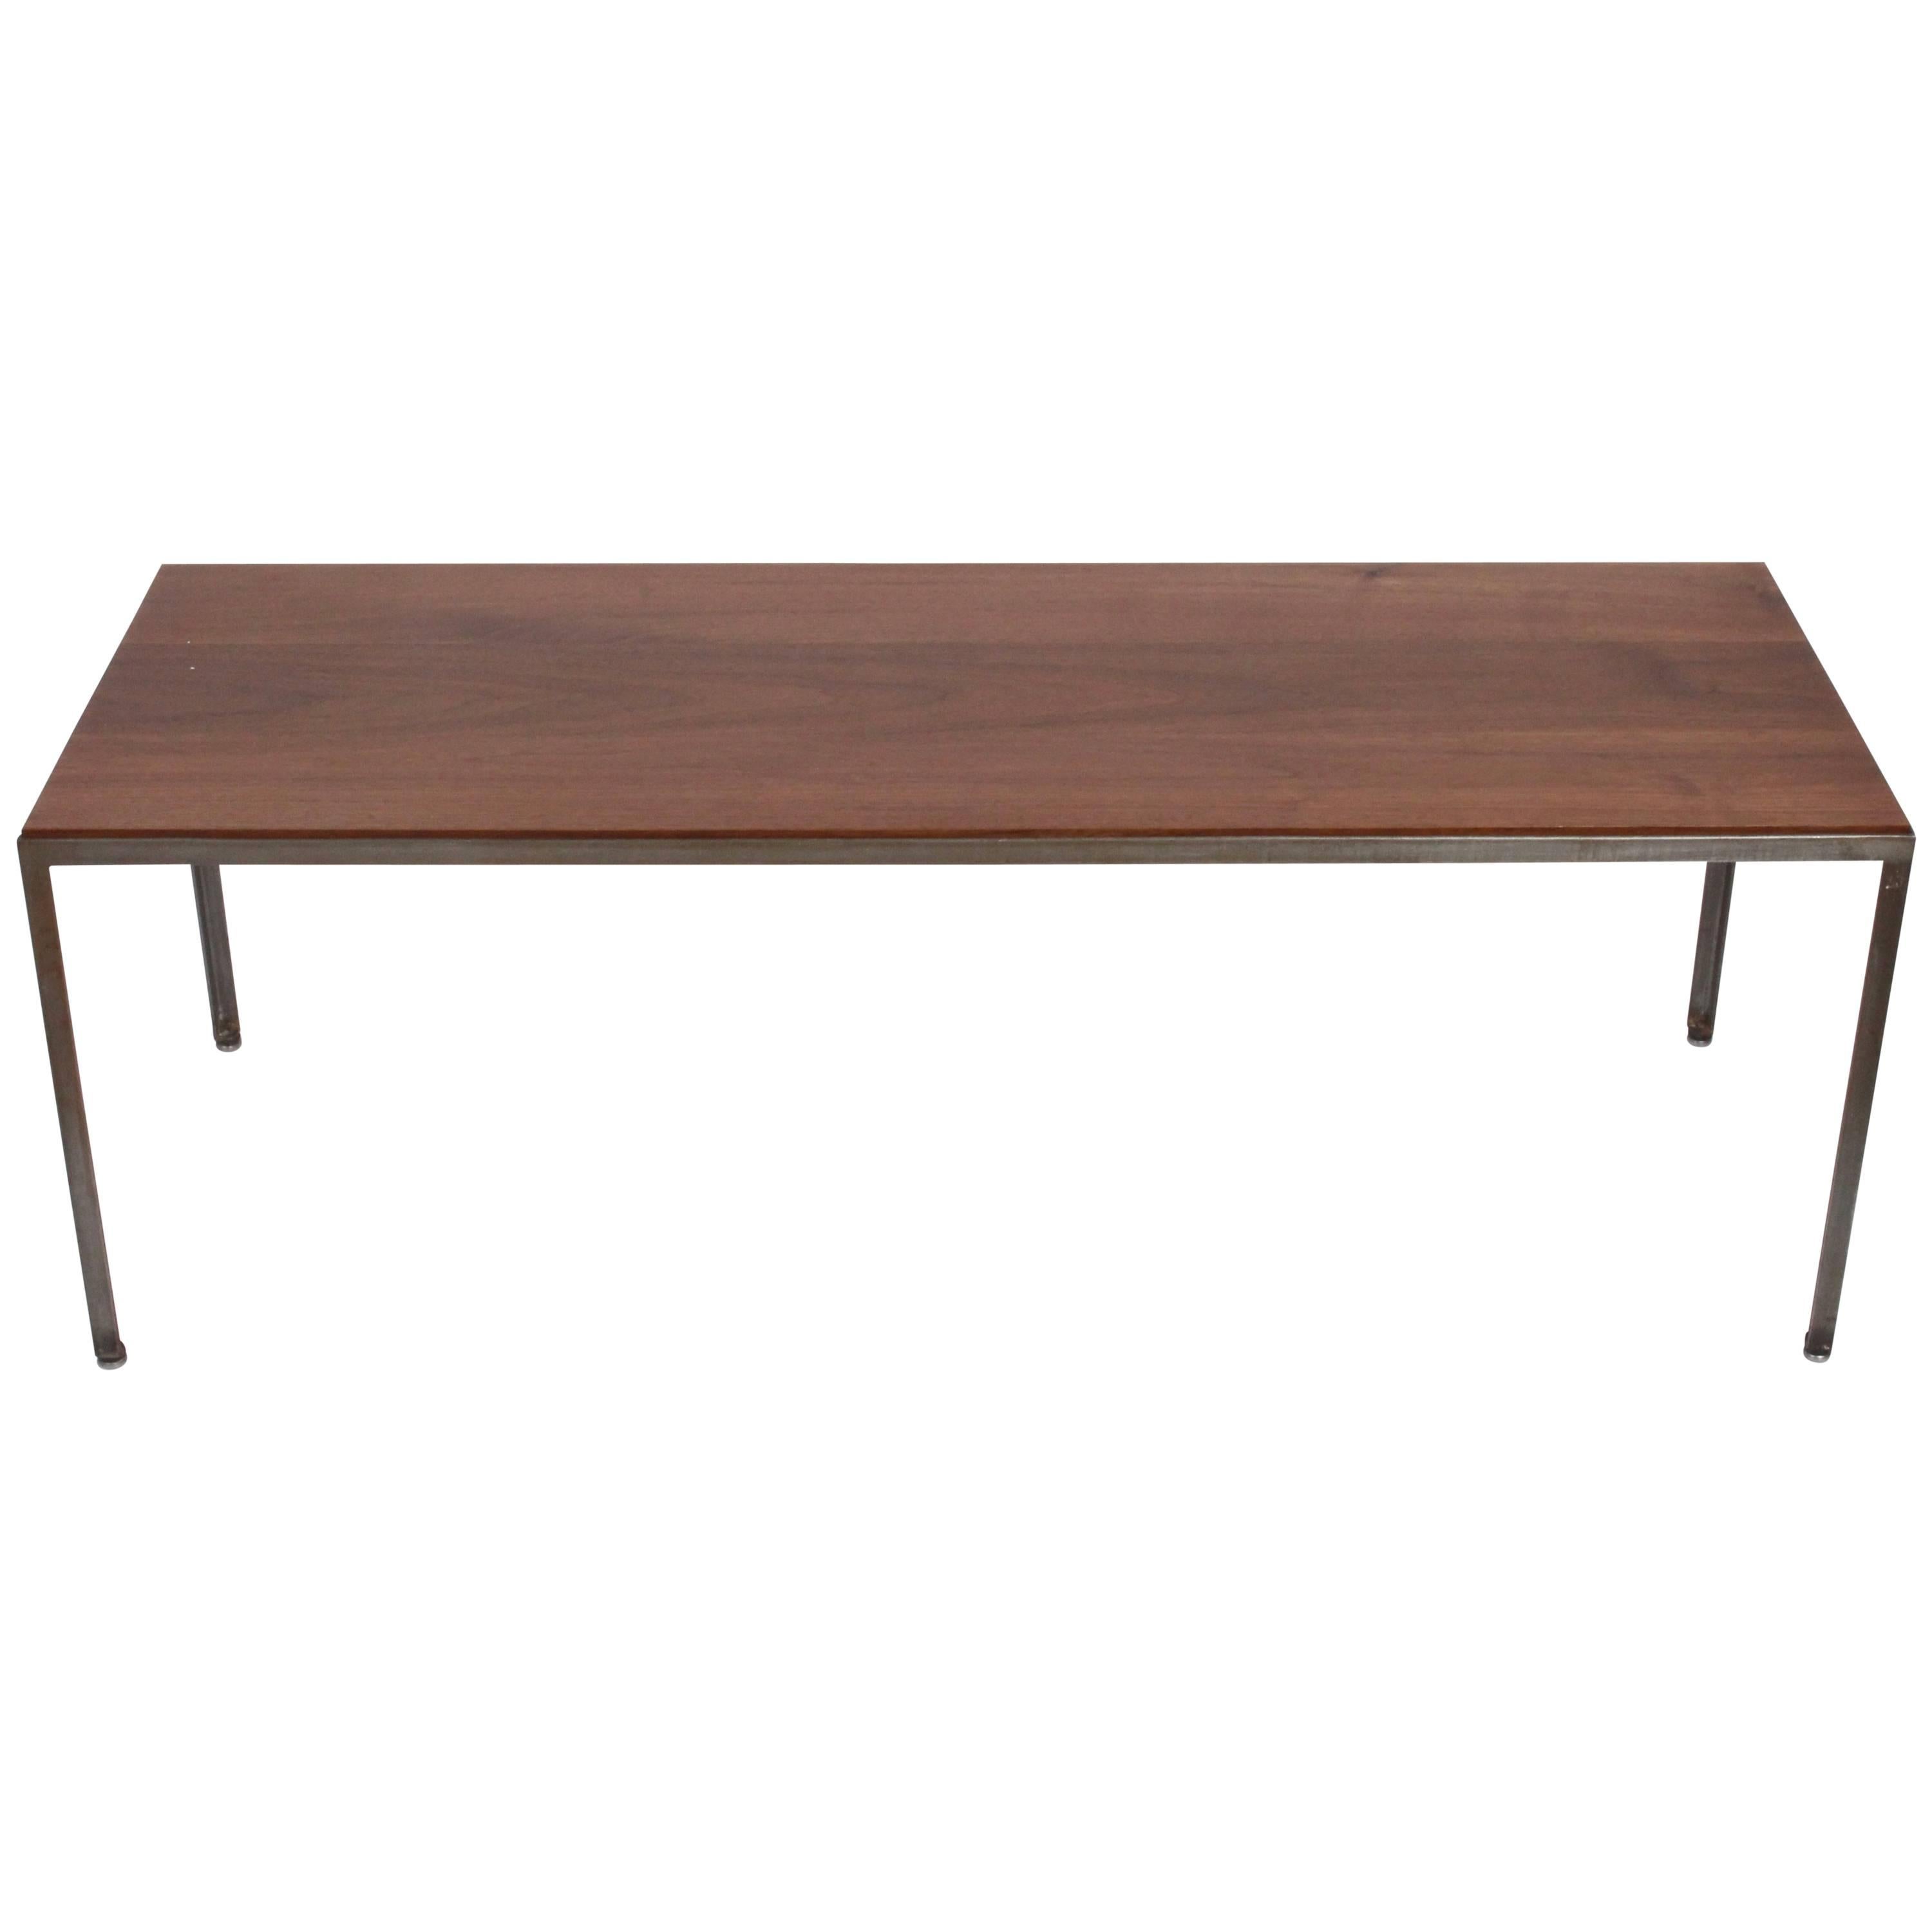 George Nelson for Herman Miller Solid Black Walnut and Iron Coffee Table, 1960s